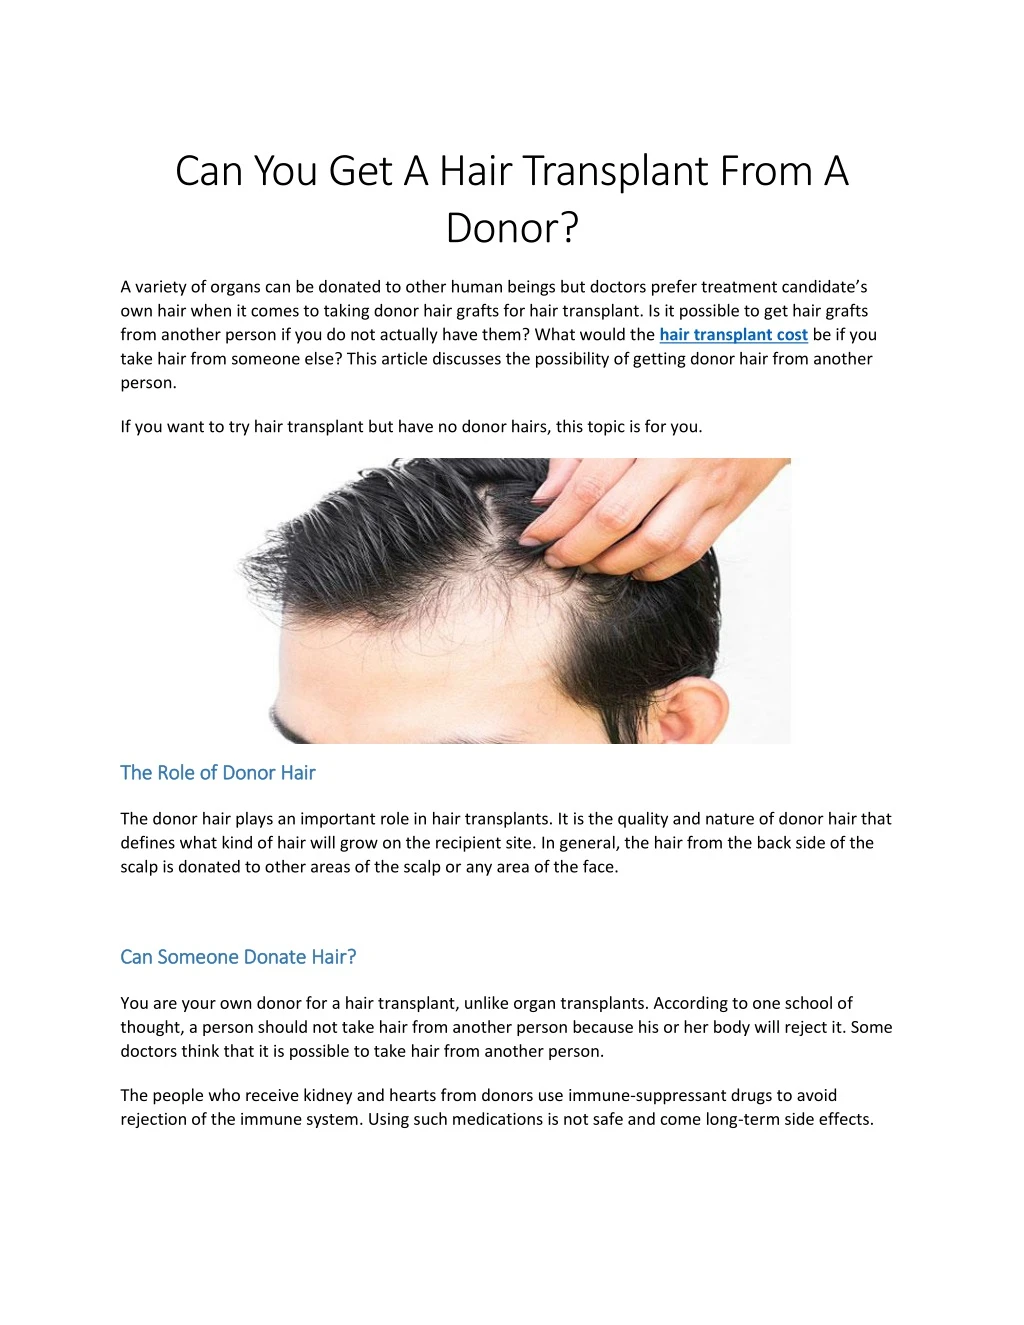 can you get a hair transplant from a donor